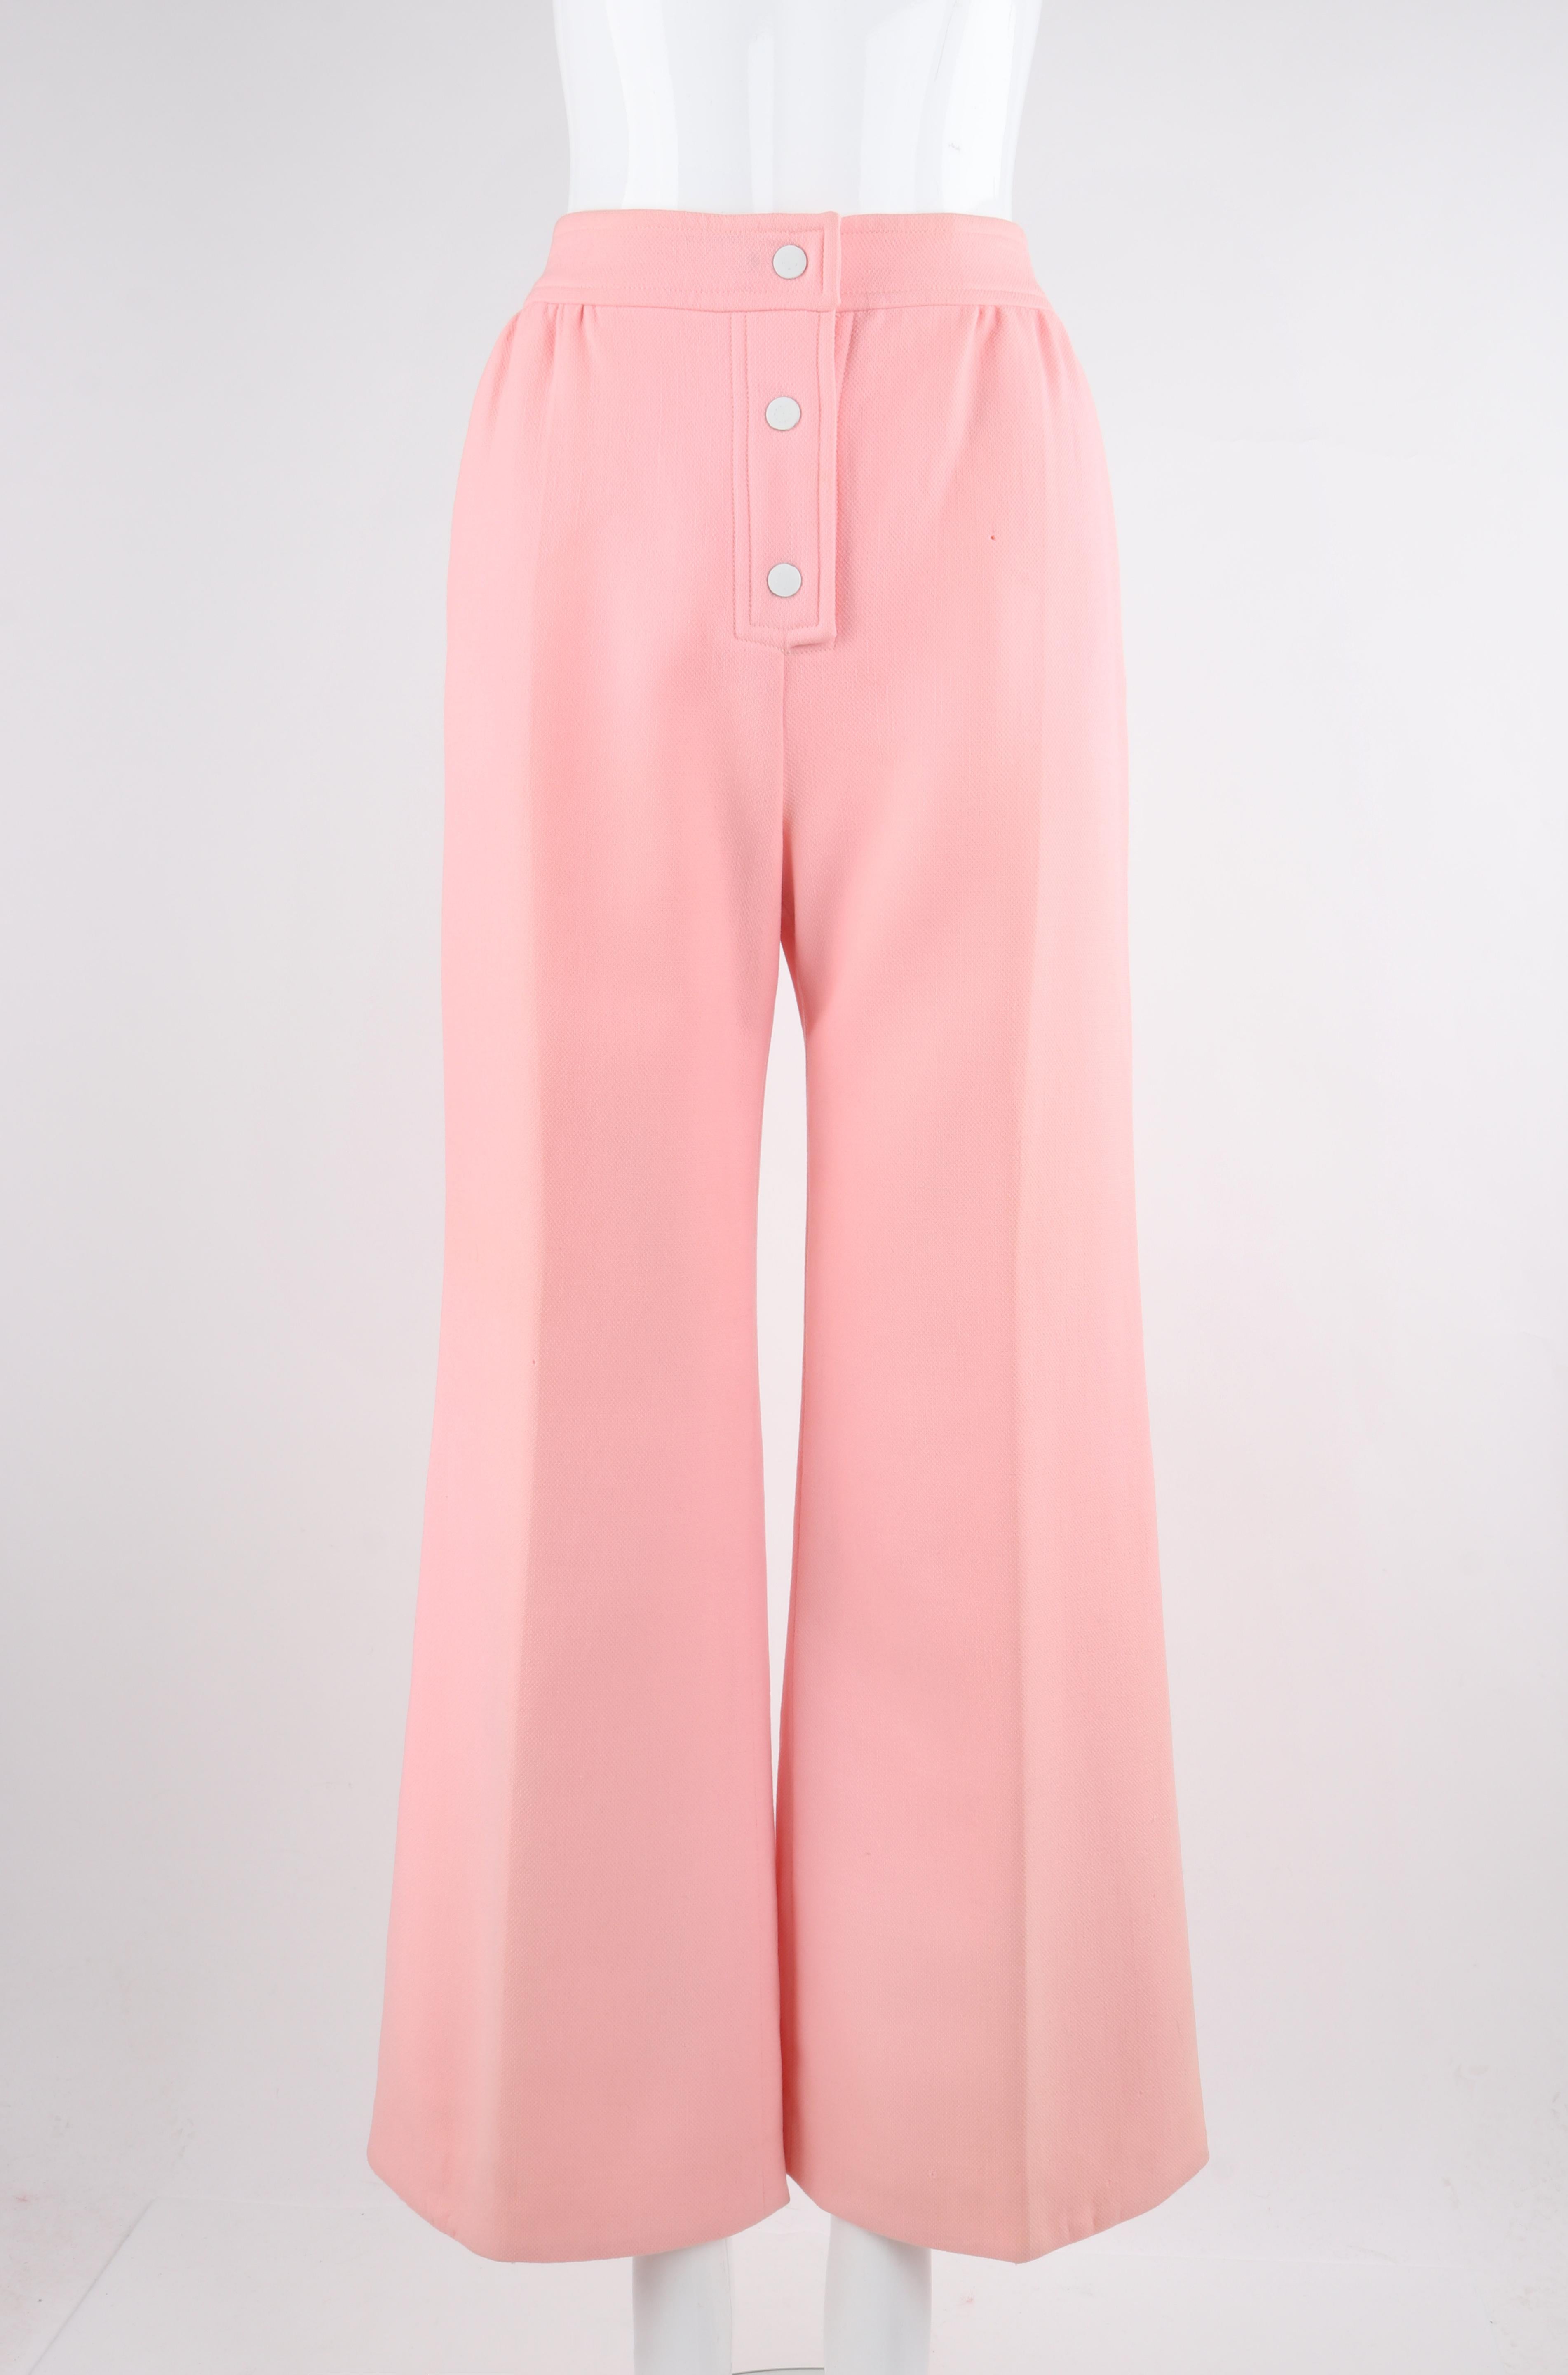 COURREGES Hyperbole c.1970's Vtg Pink Wool High Rise Wide Leg Trouser Pants

Brand / Manufacturer: Courreges
Circa: 1970's
Designer: Andre Courreges
Style: Wide Leg Pants
Color(s): Pink (fabric), White (snaps)
Lined: Yes
Marked Fabric: 